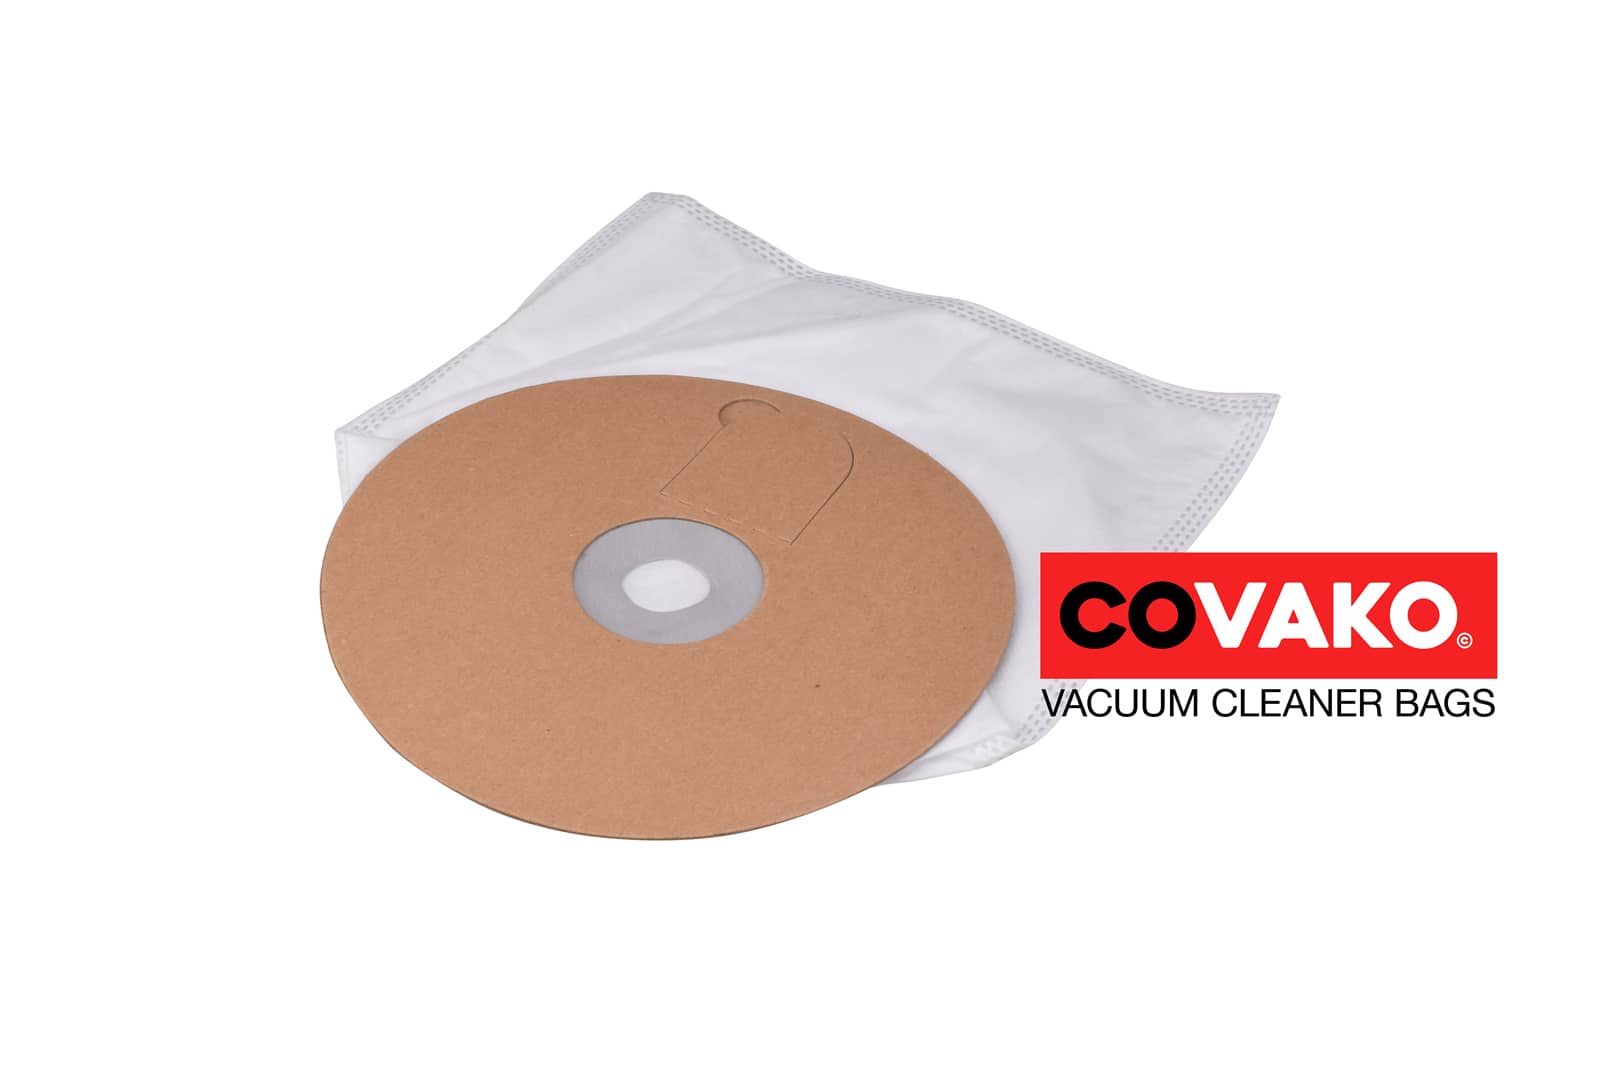 Clean a la Card Ruck Zuck / Synthesis - Clean a la Card vacuum cleaner bags